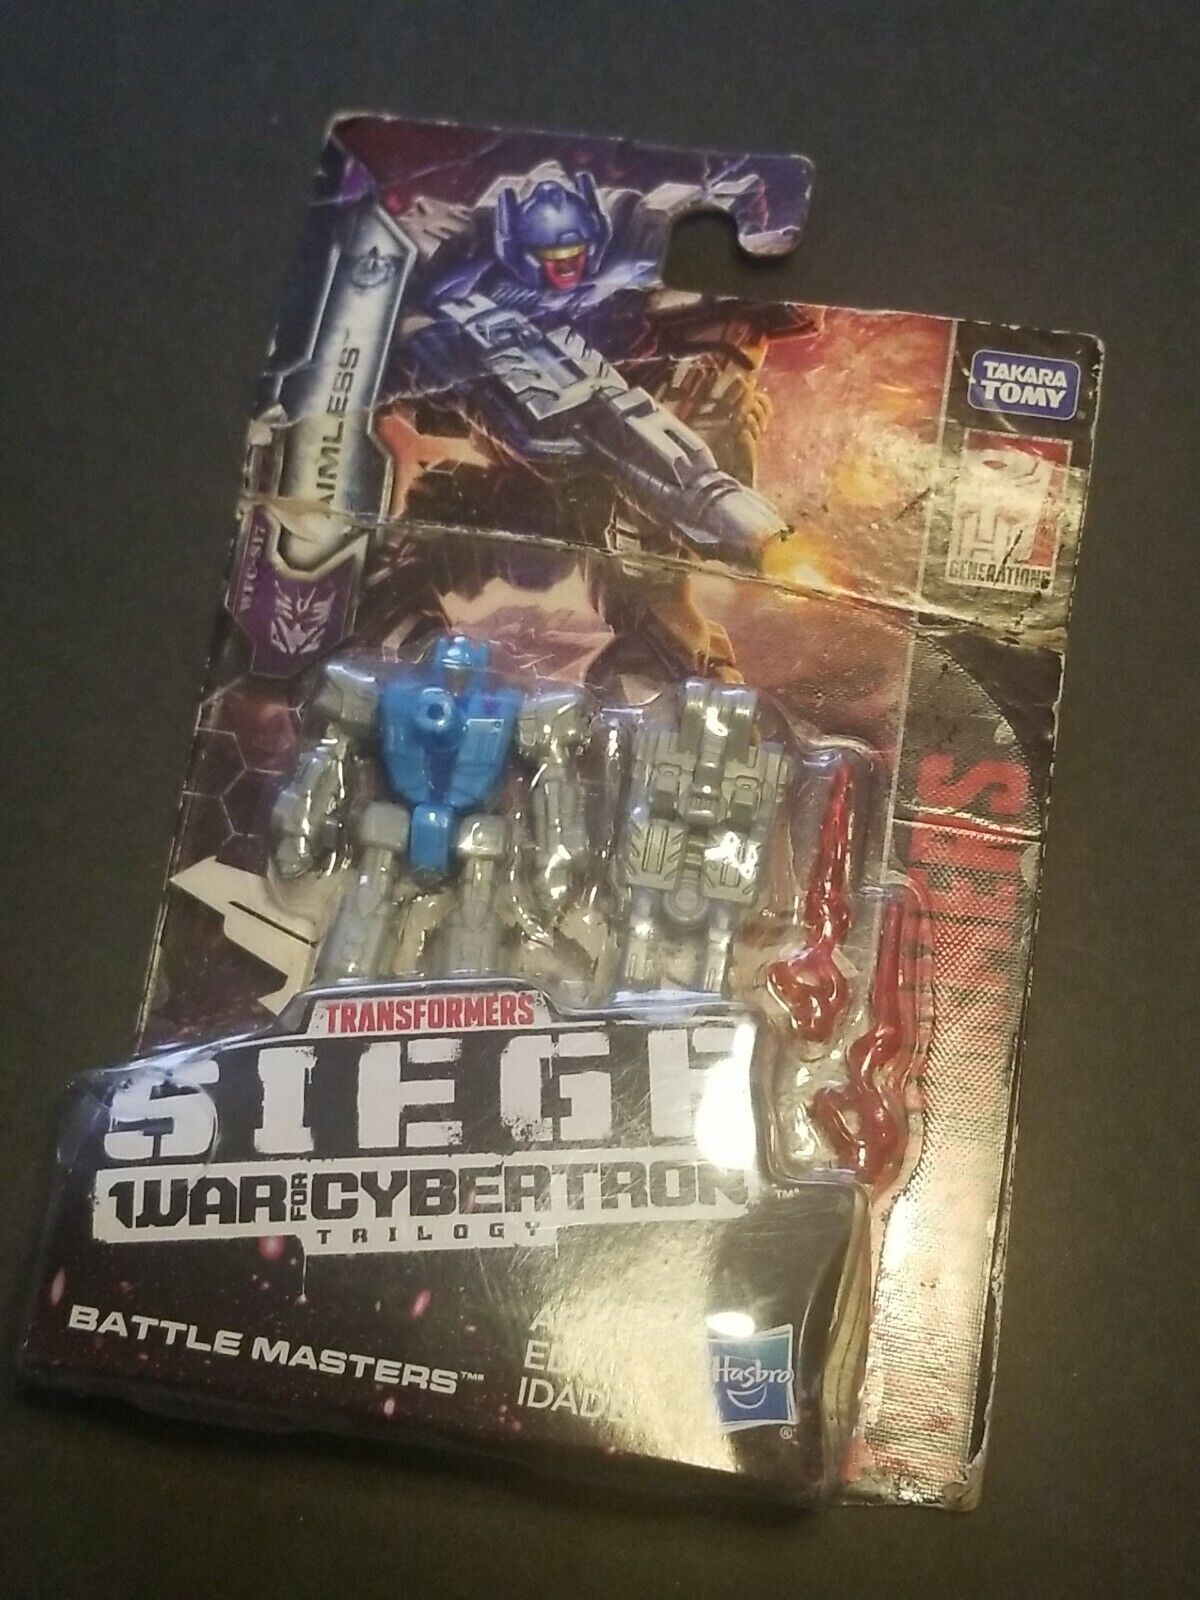 Wfc-s17 Aimless Transformers War for Cybertron Siege Battle Master Hasbro 2019 for sale online